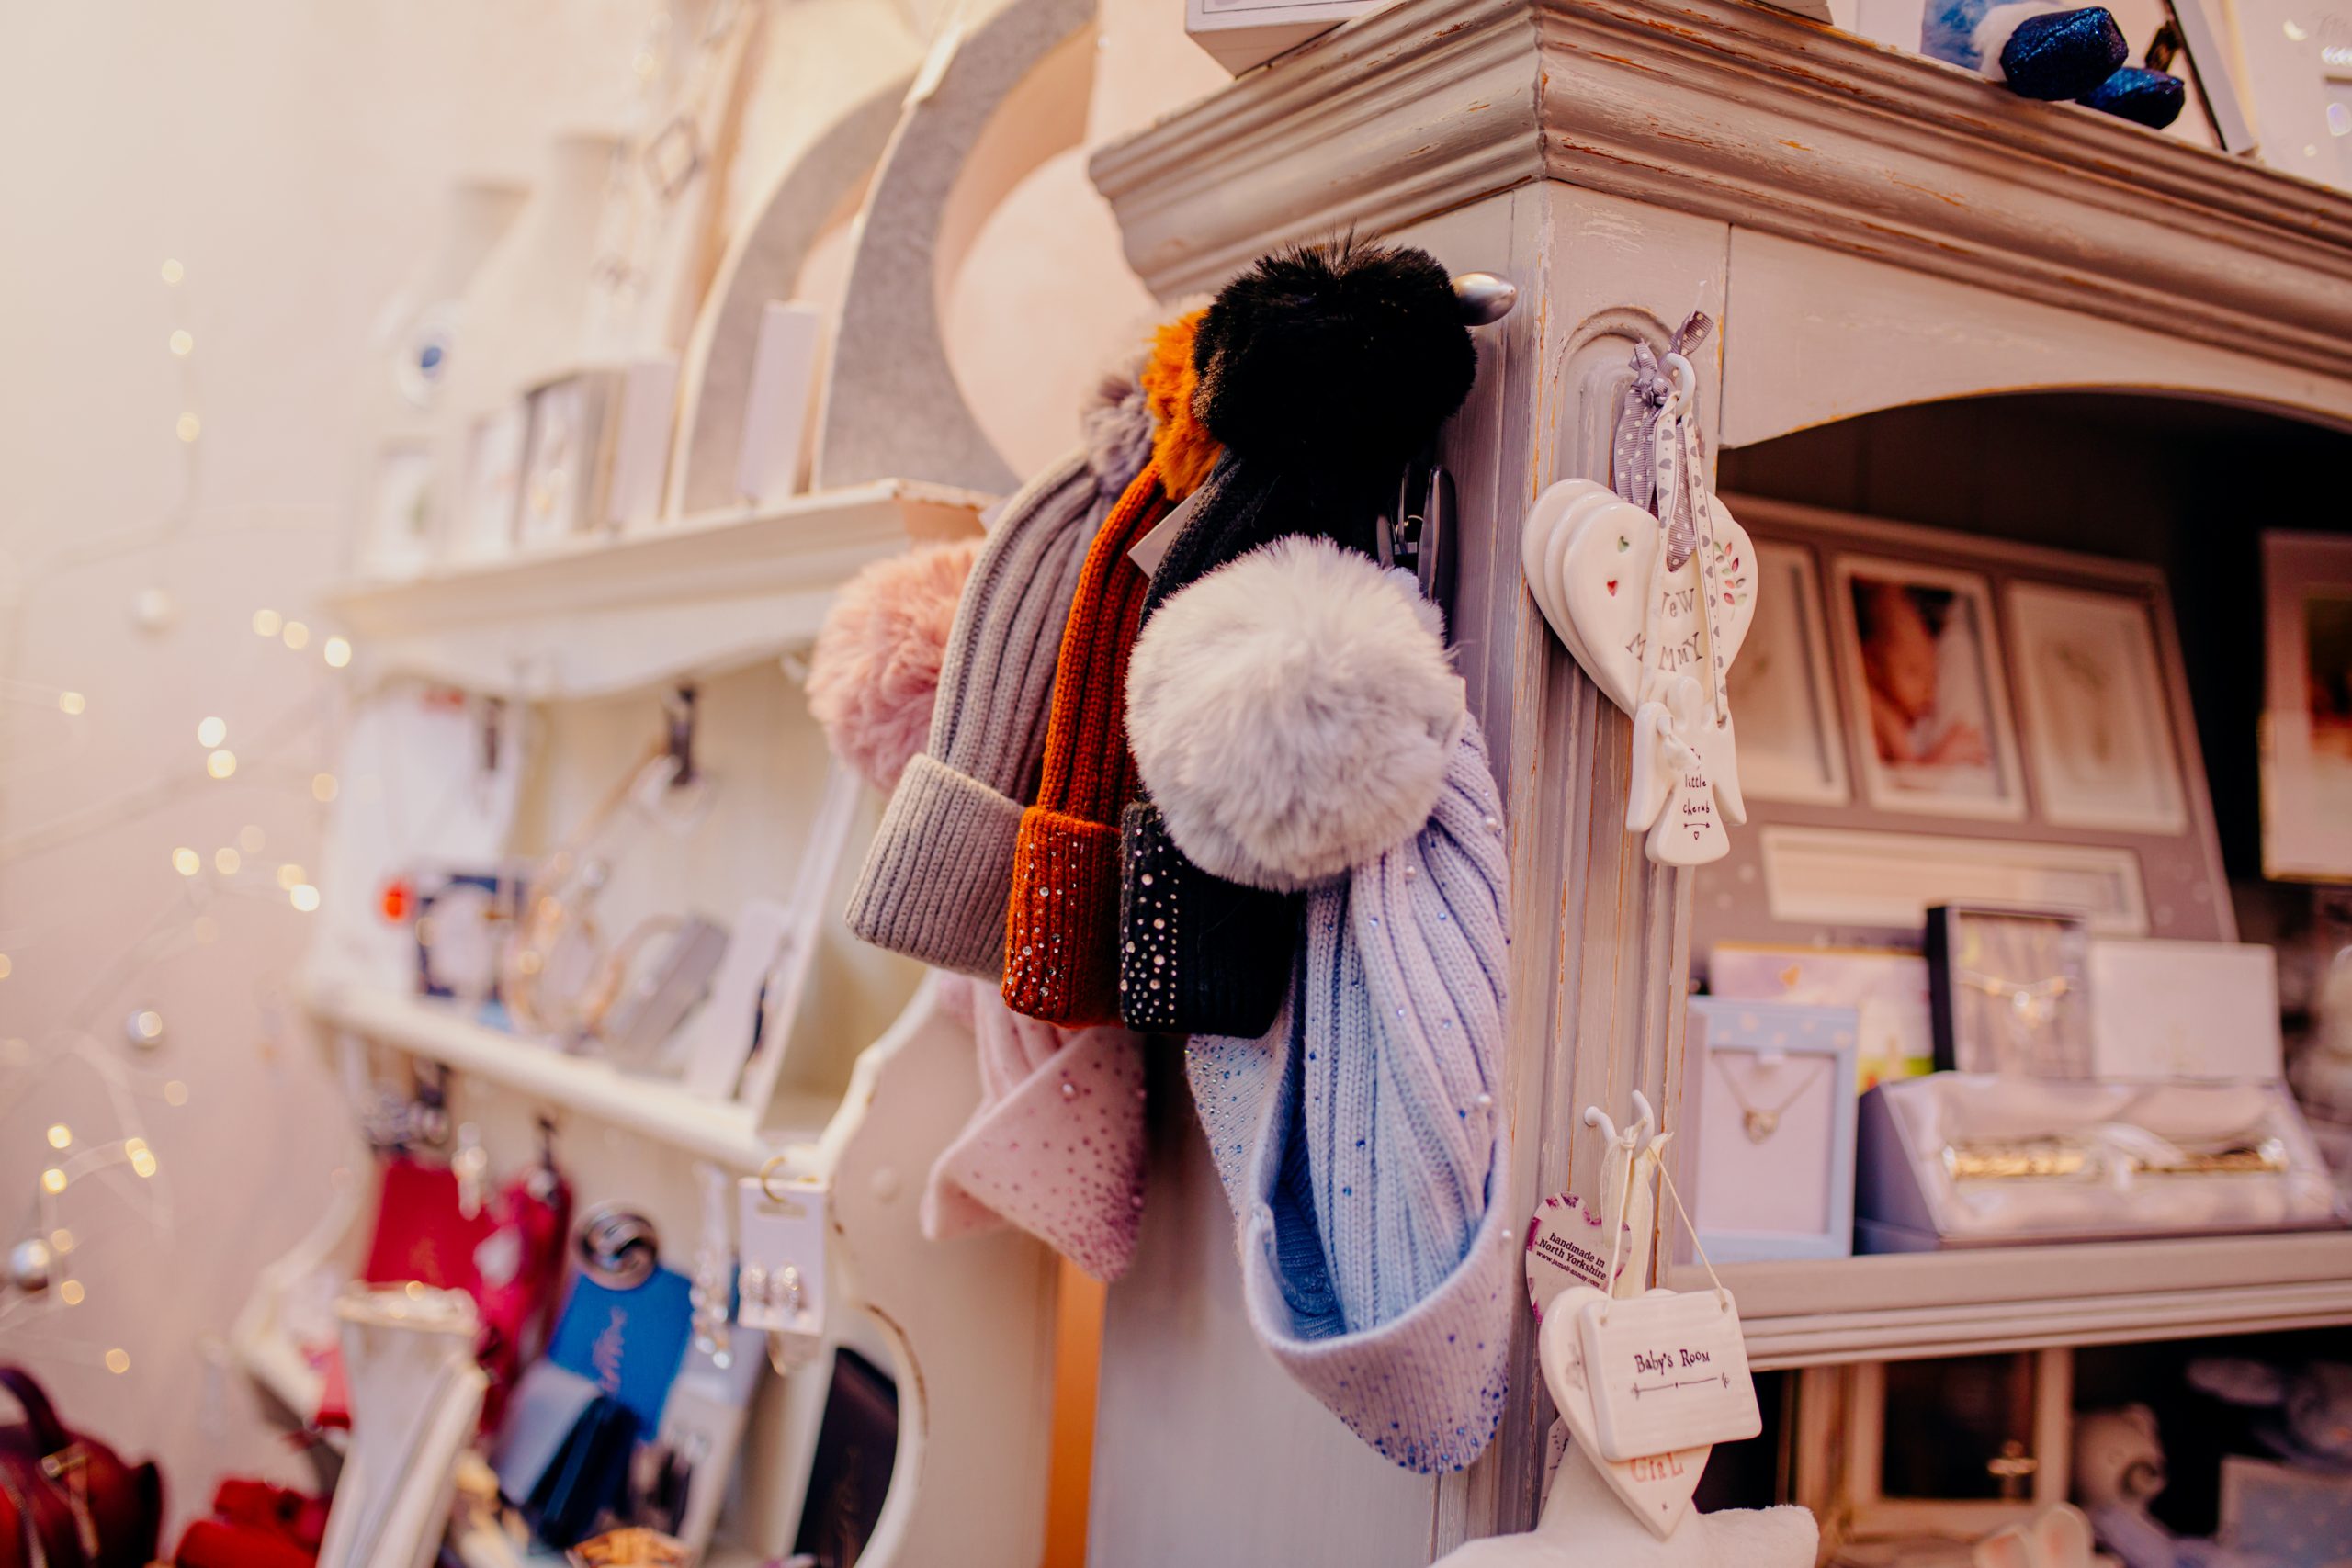 Snooks Gift Boutique, photo by Peter Flude